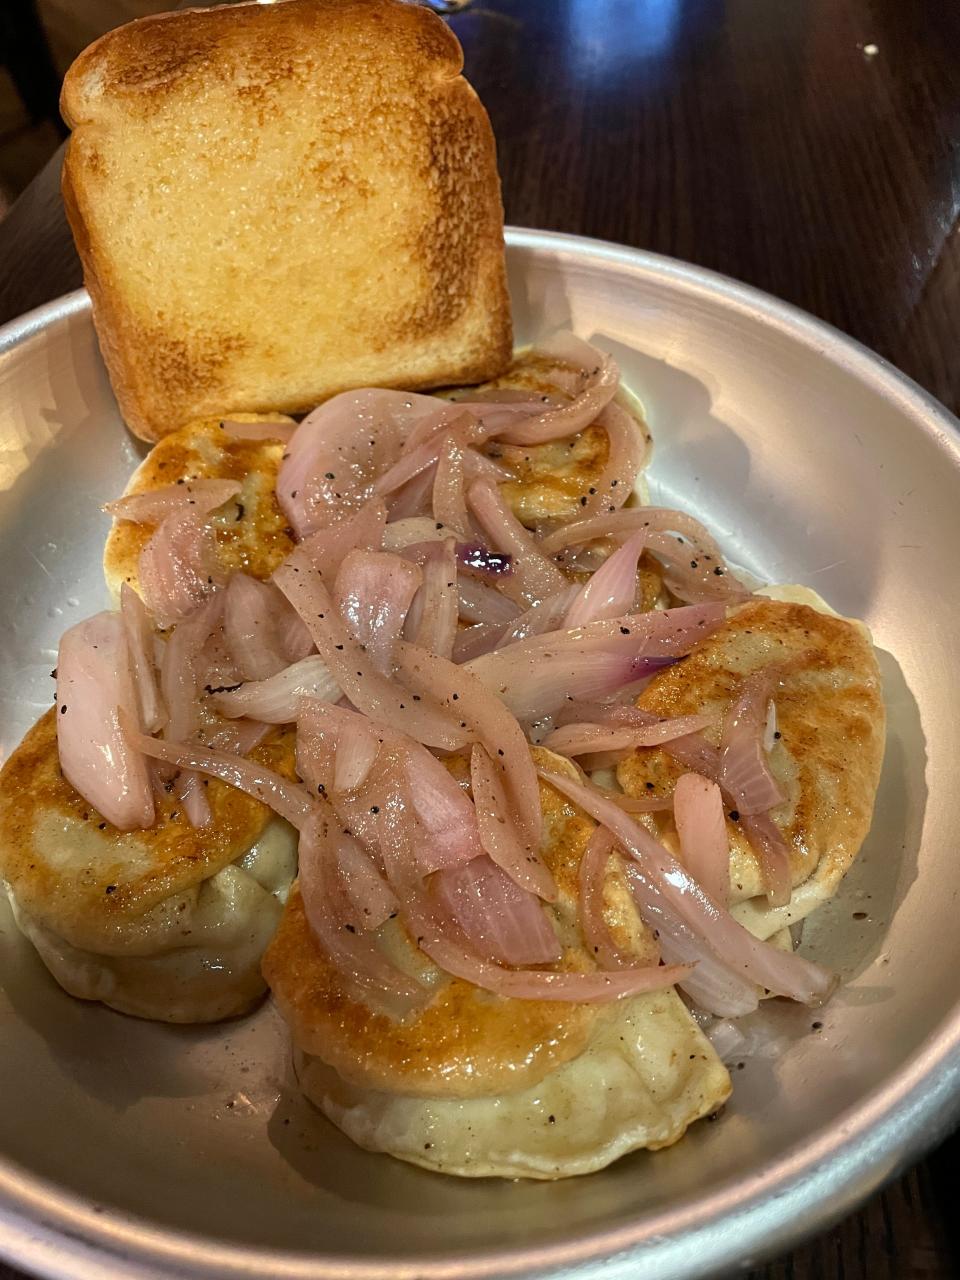 Cast Iron offers several variations of pierogi. Here is the potato, Gouda and bacon, topped with onions and served with garlic bread.